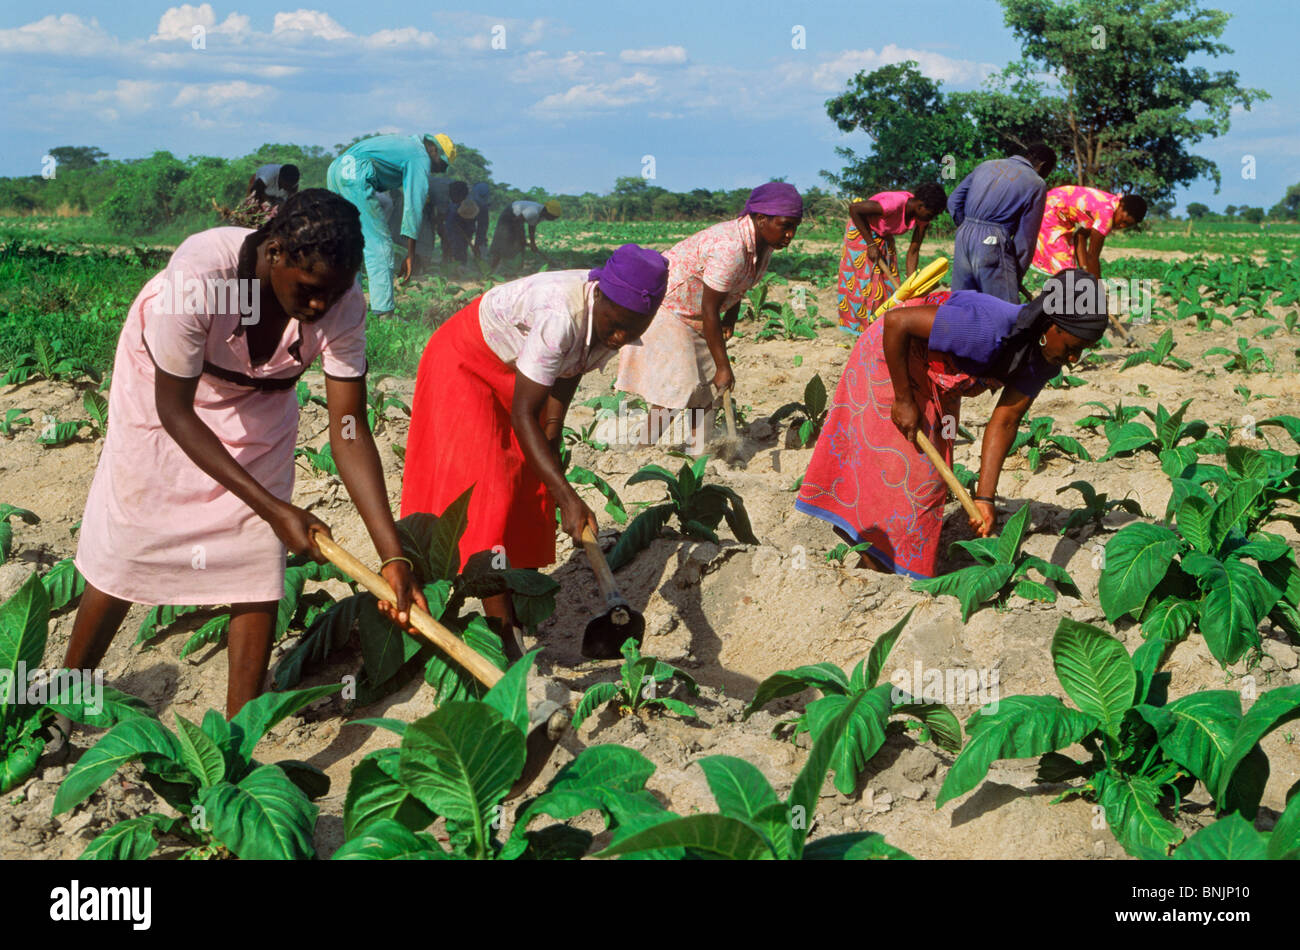 African men and women hoeing amid rows of tobacco plants on plantation in Zimbabwe Stock Photo